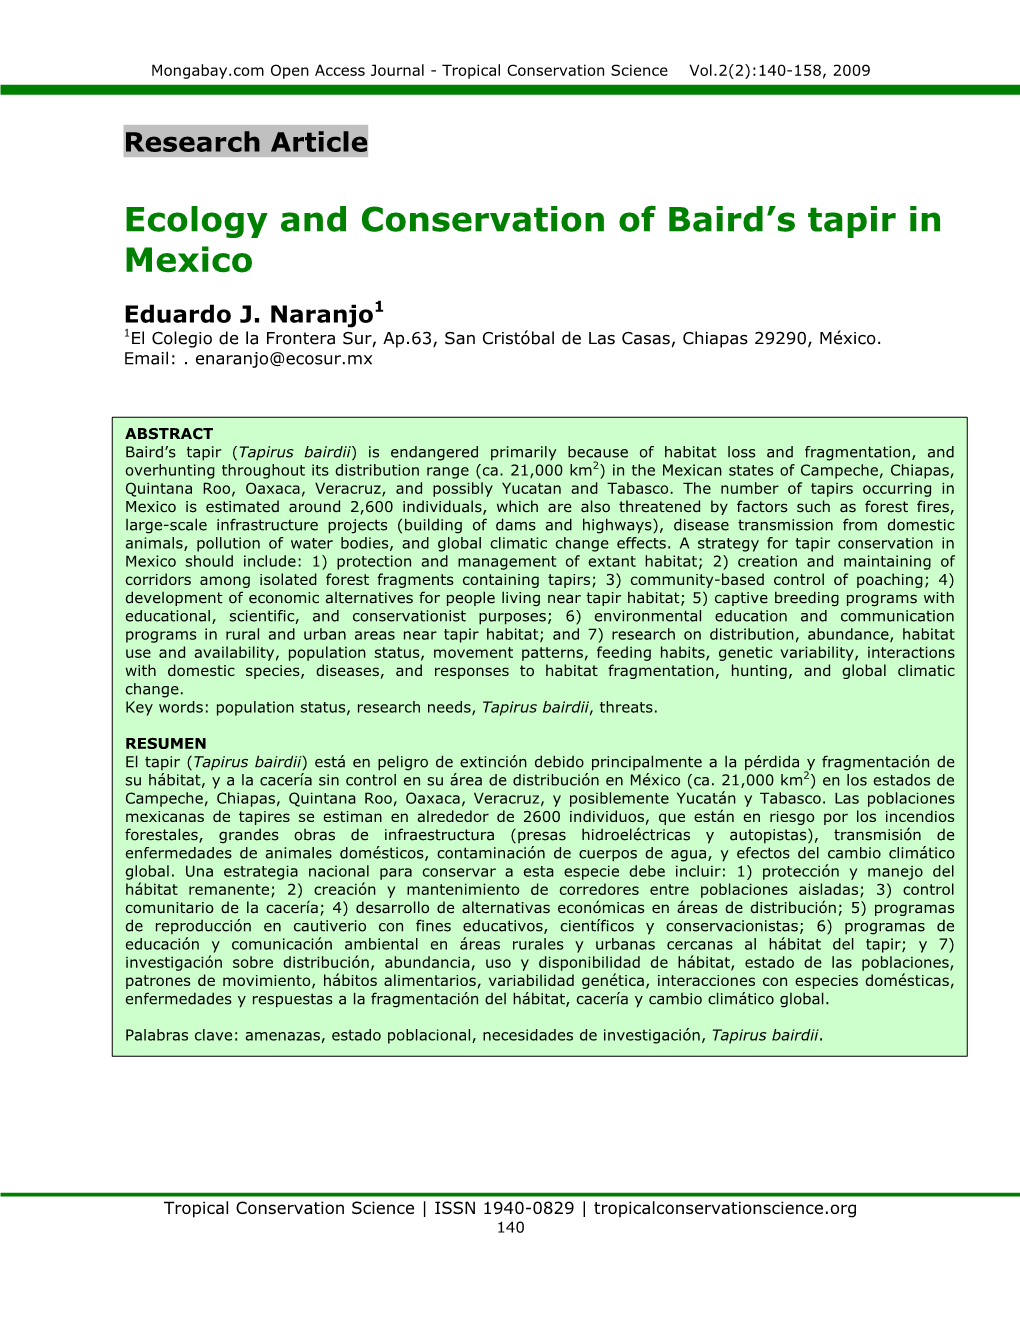 Ecology and Conservation of Baird's Tapir in Mexico